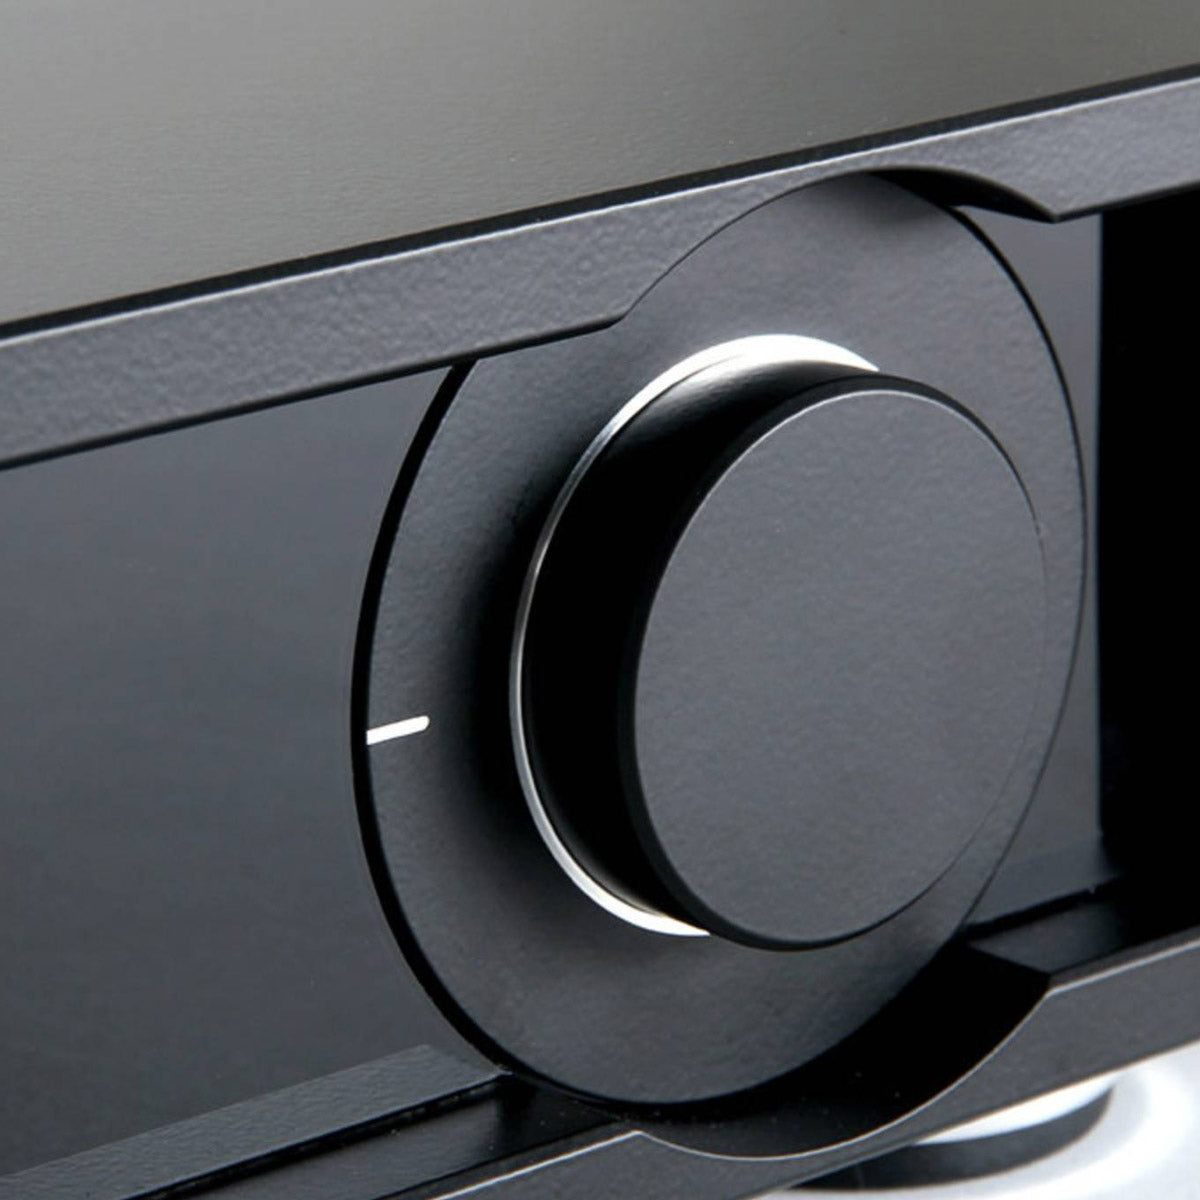 The details of the premium amplifier by Rega called Aethos